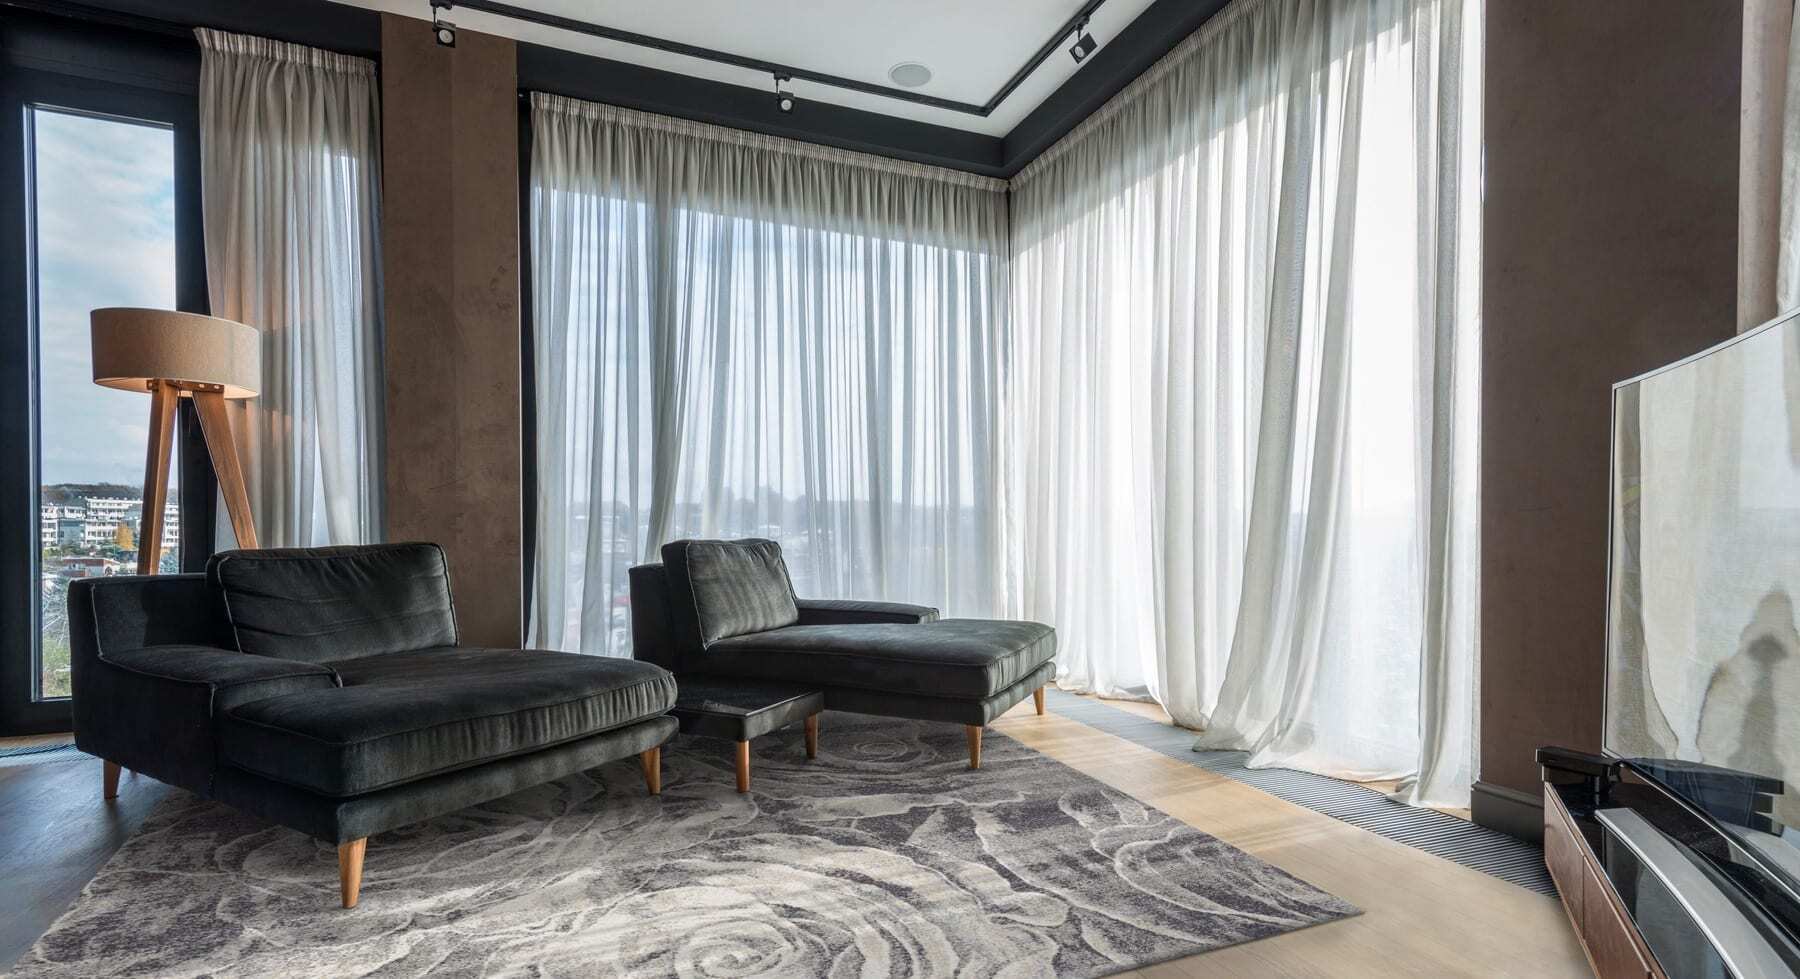 Ros Anthracite rug by Agnella